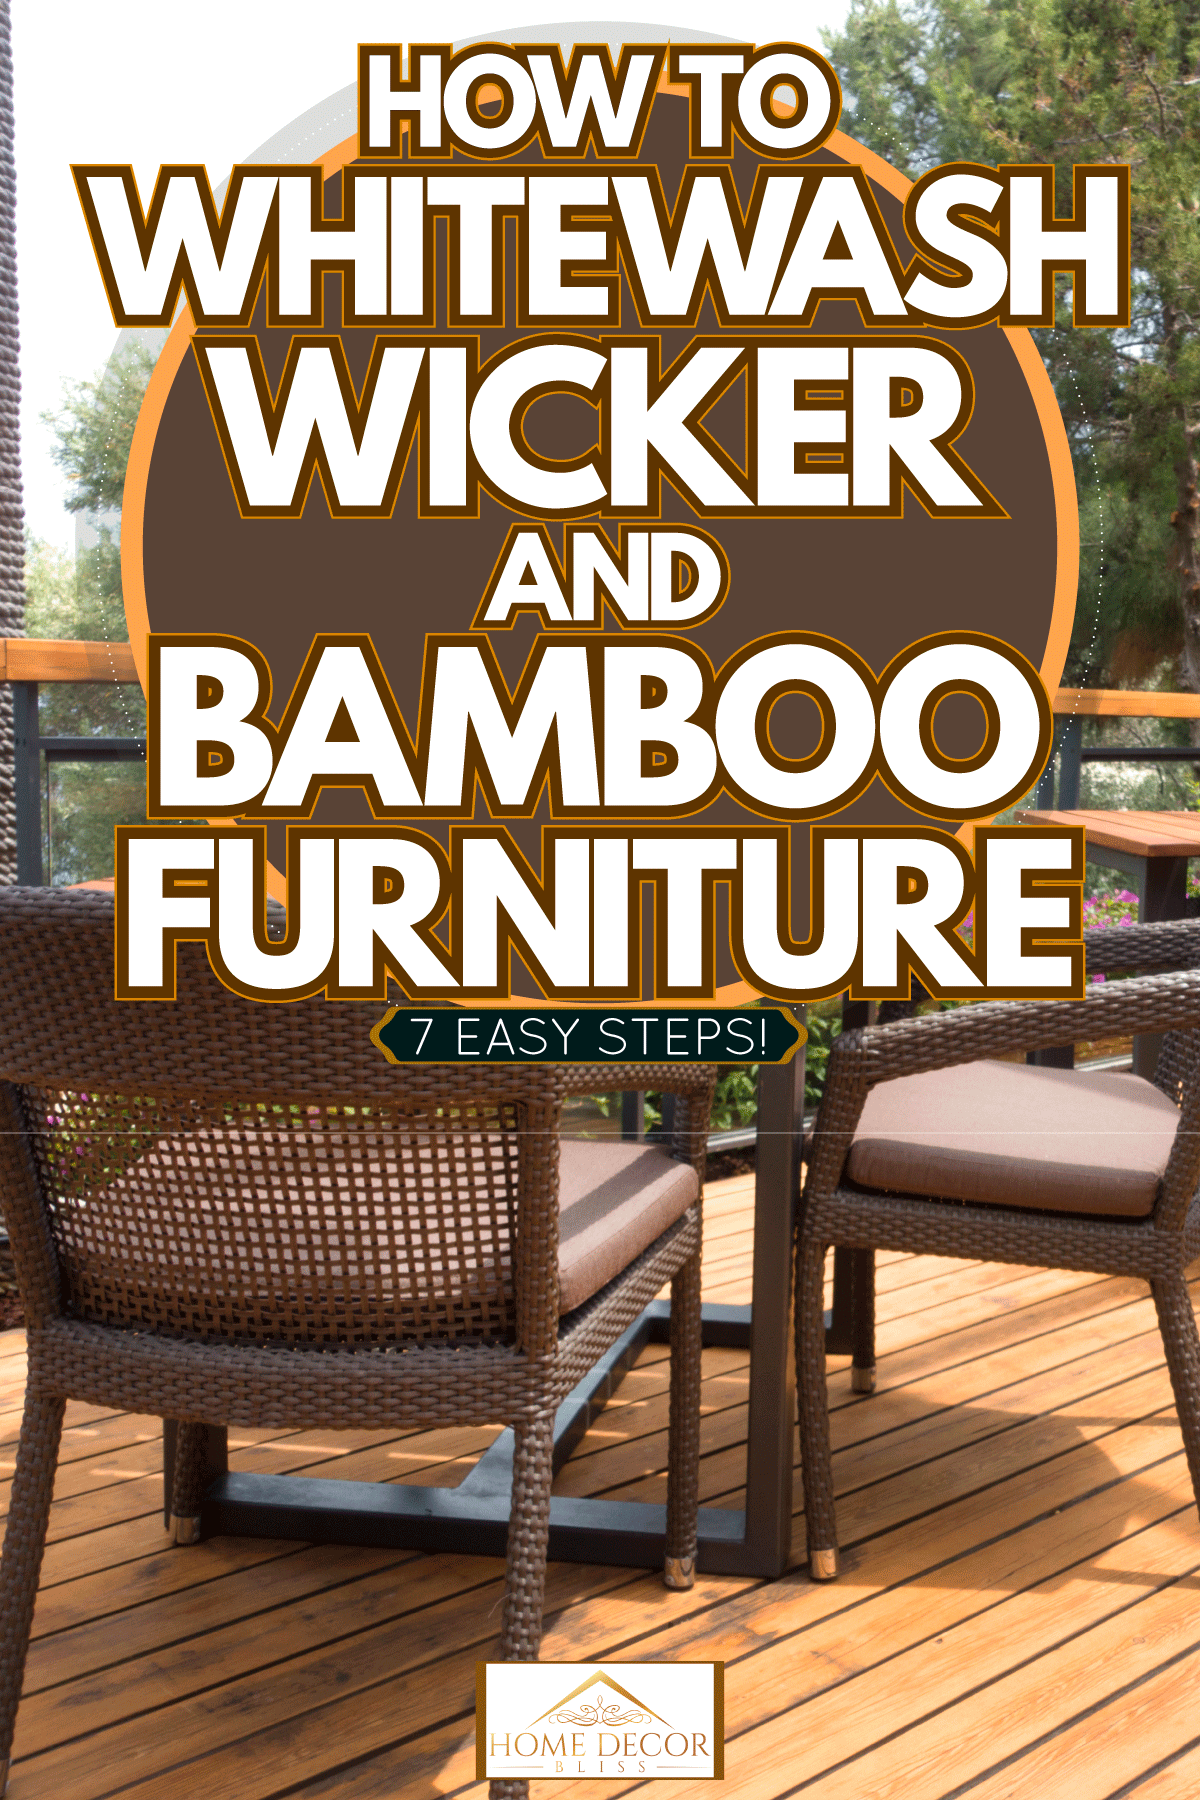 Brown wicker furniture's, hardwood tables at a view deck for a beach, Brown wicker furniture's, hardwood tables at a view deck for a beach, How To Whitewash Wicker And Bamboo Furniture [7 Easy Steps!]